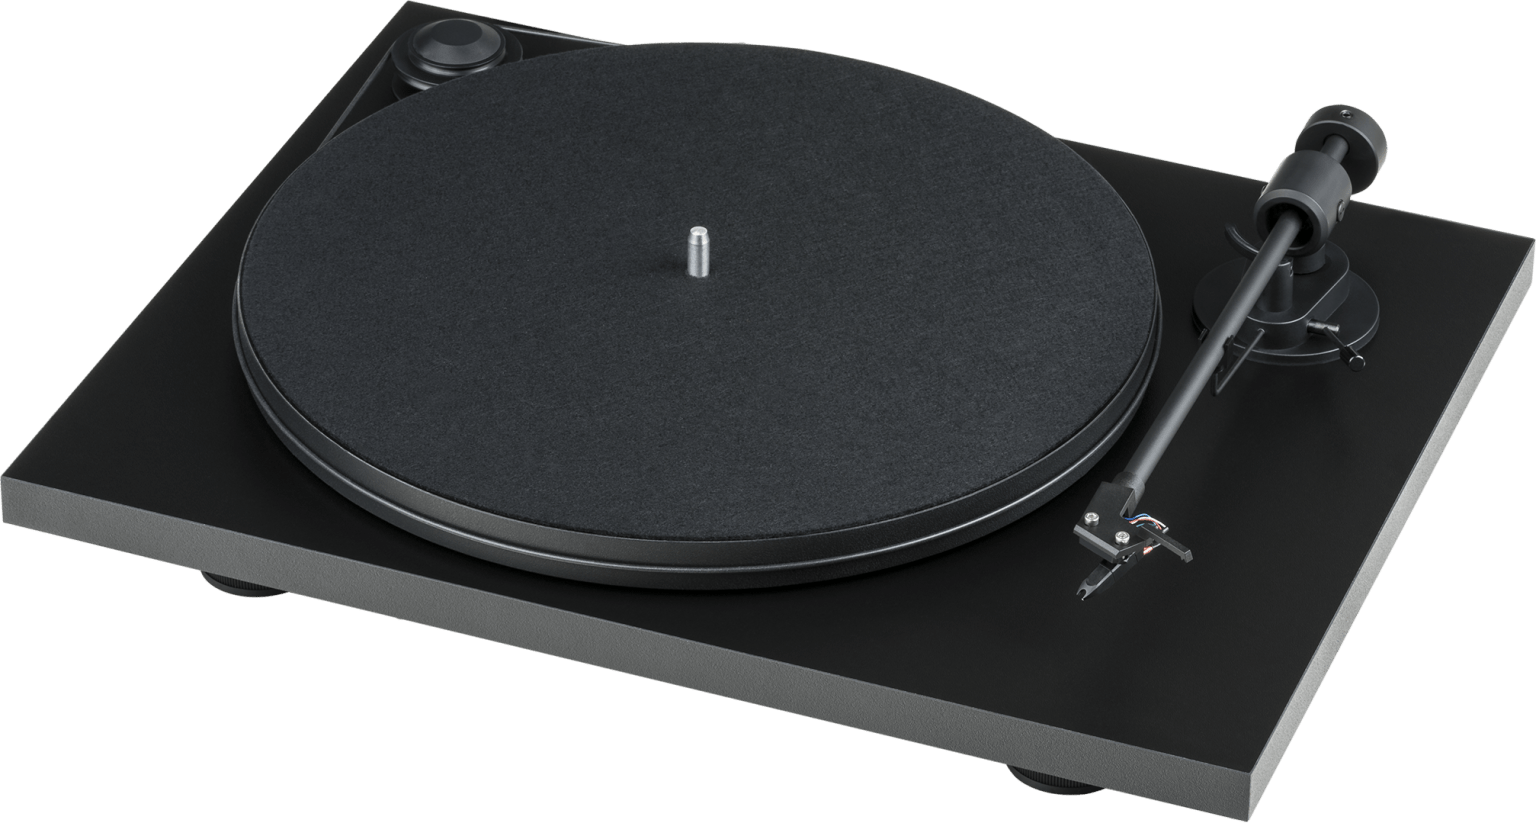 Pro-Ject - Primary E Phono Turntable